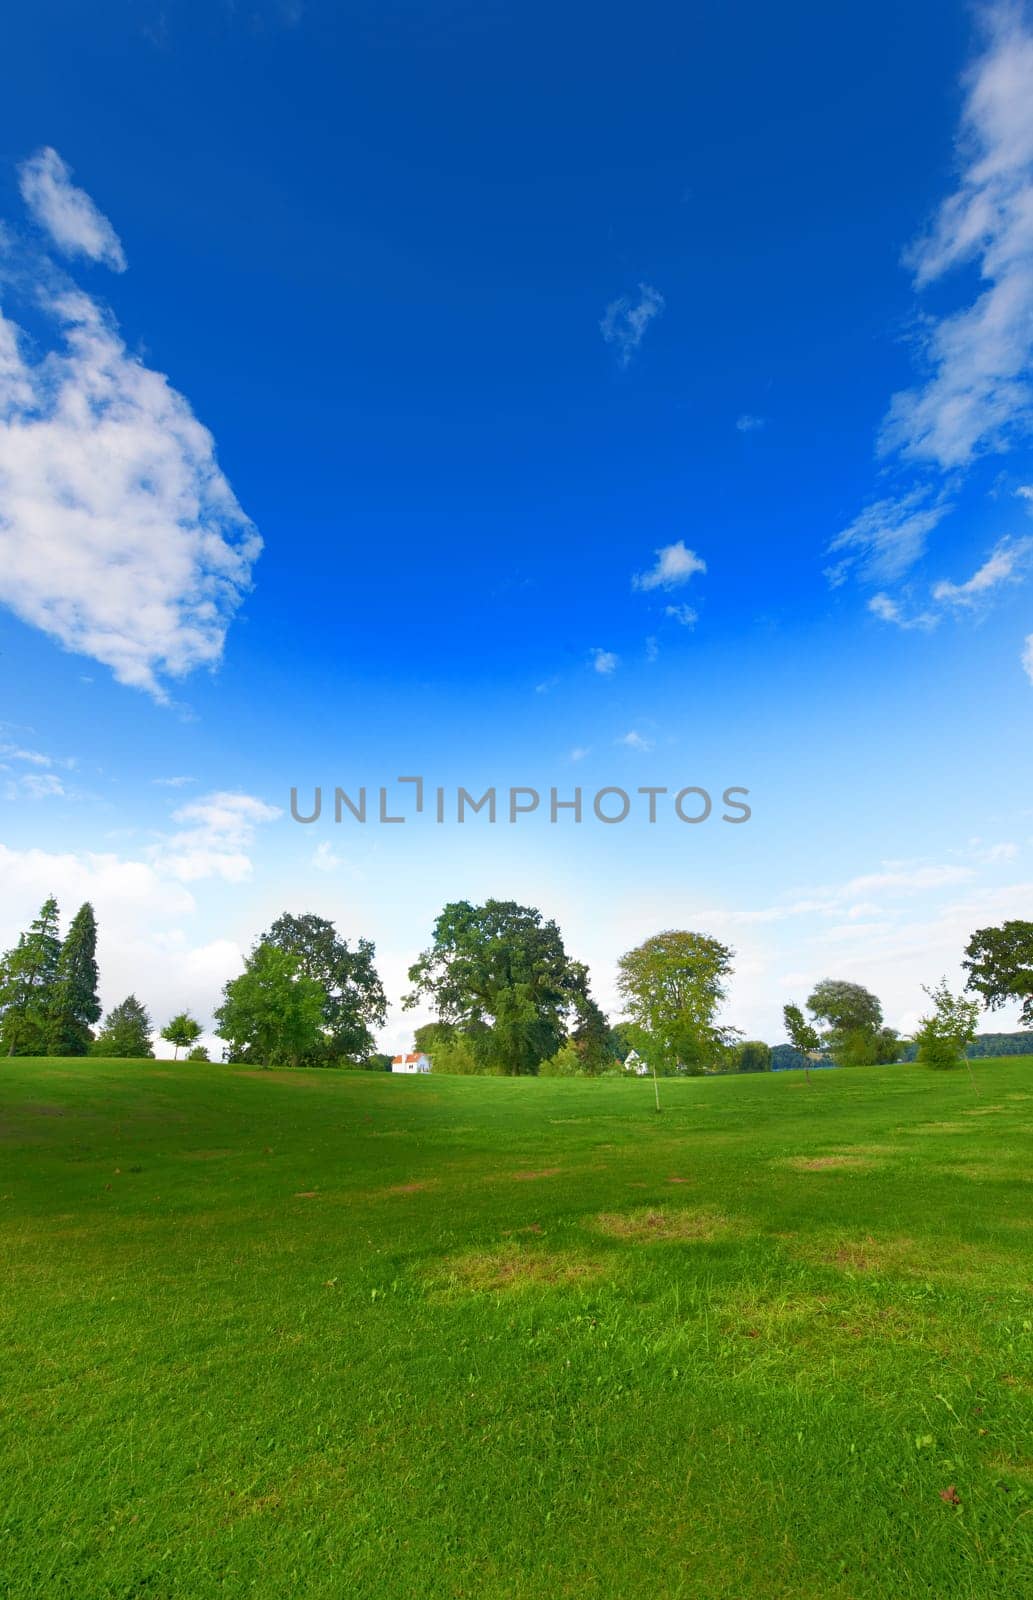 Landscape, field and nature in environment, trees and land with peace, blue sky and ecosystem in countryside. Sustainability, morning and grass for golf, scenery and outdoor, greenery and park.